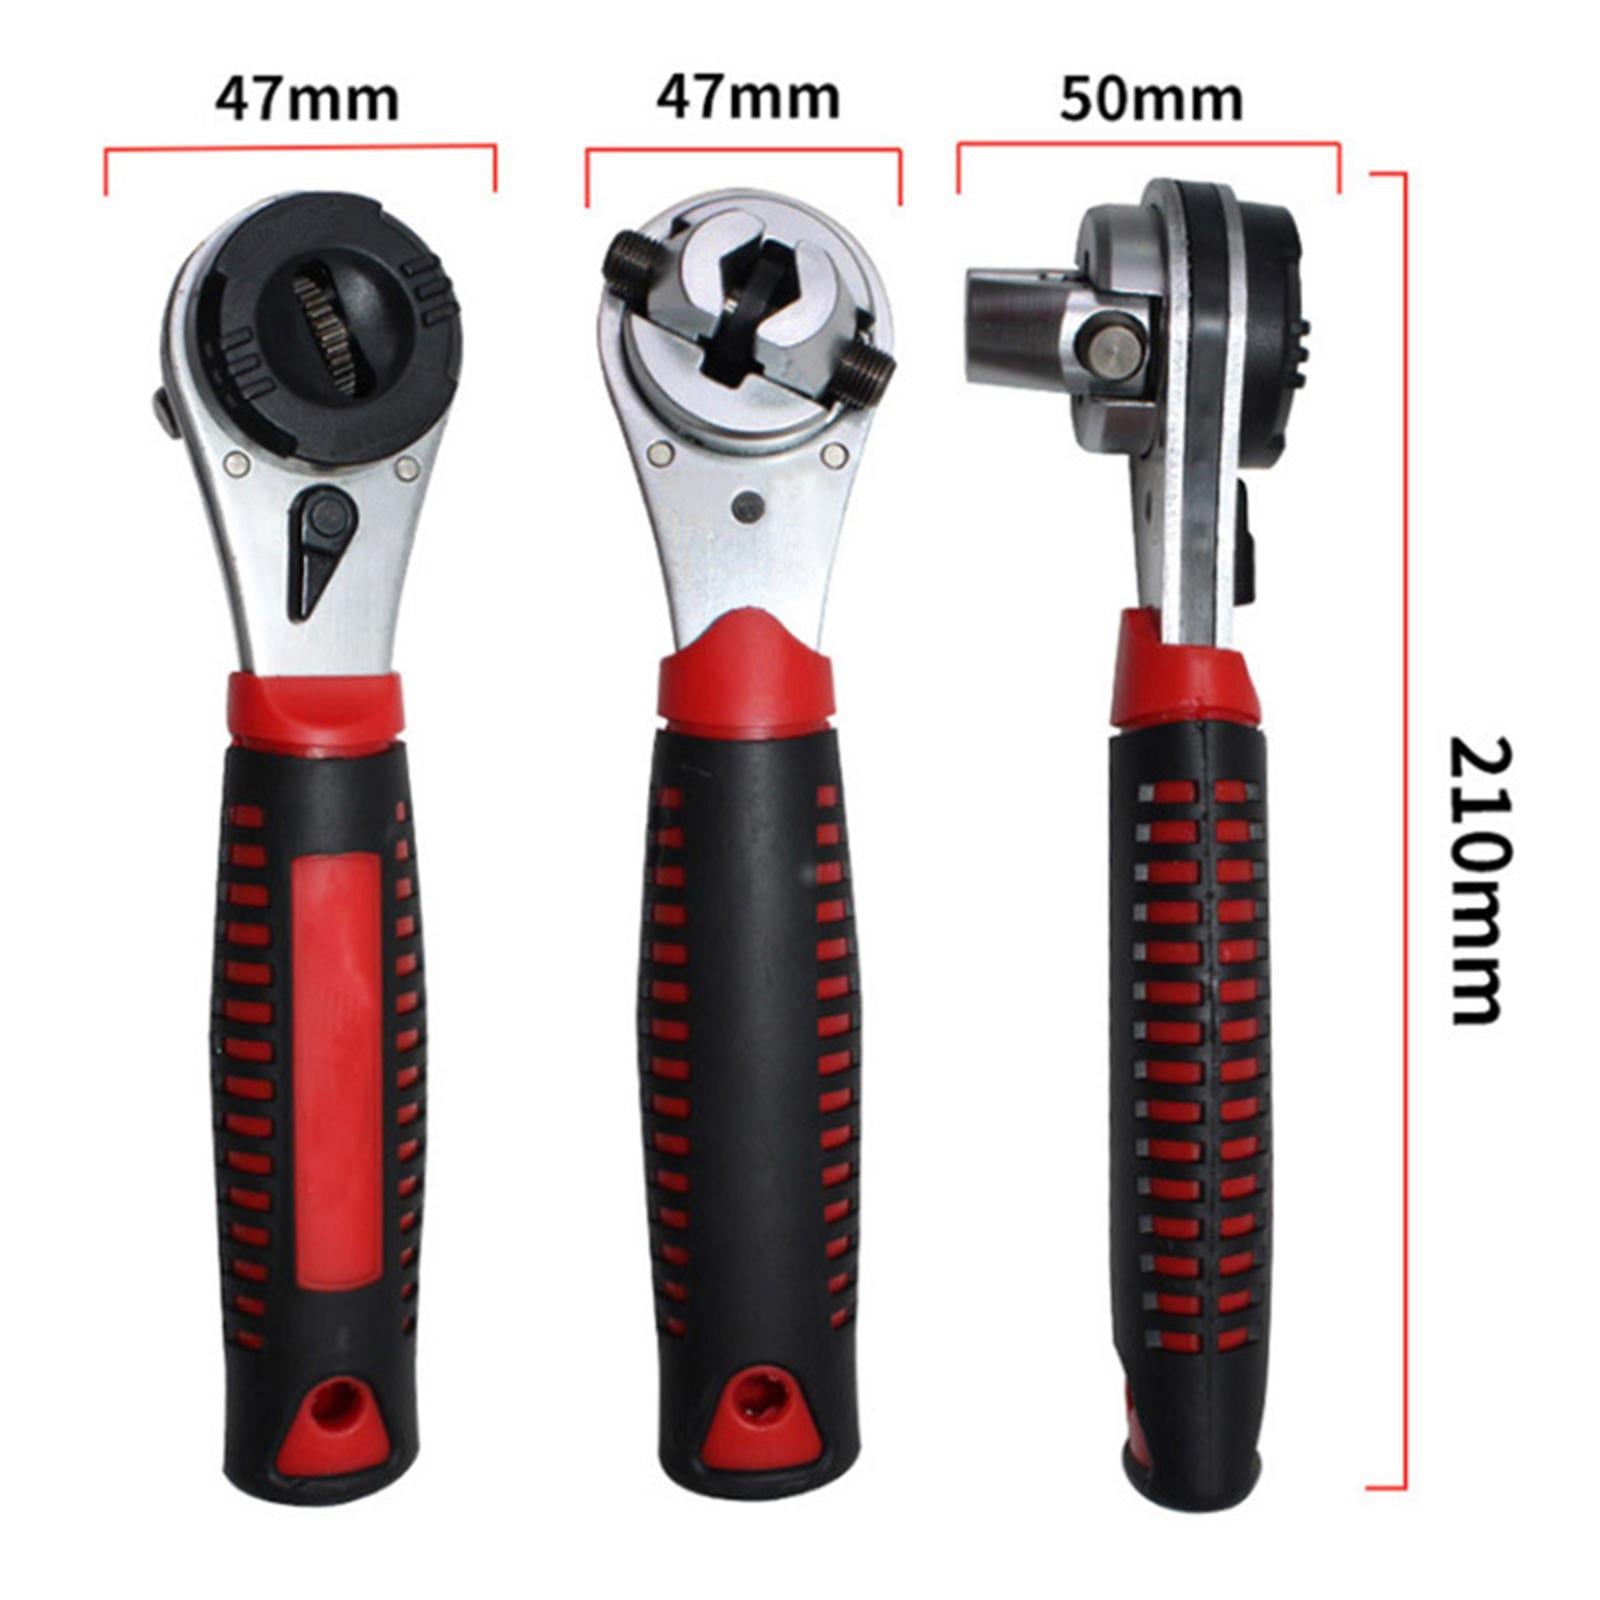 6-22mm Torque Ratchet Wrench Spanner Tool Adjustable Spanner Hand Tool